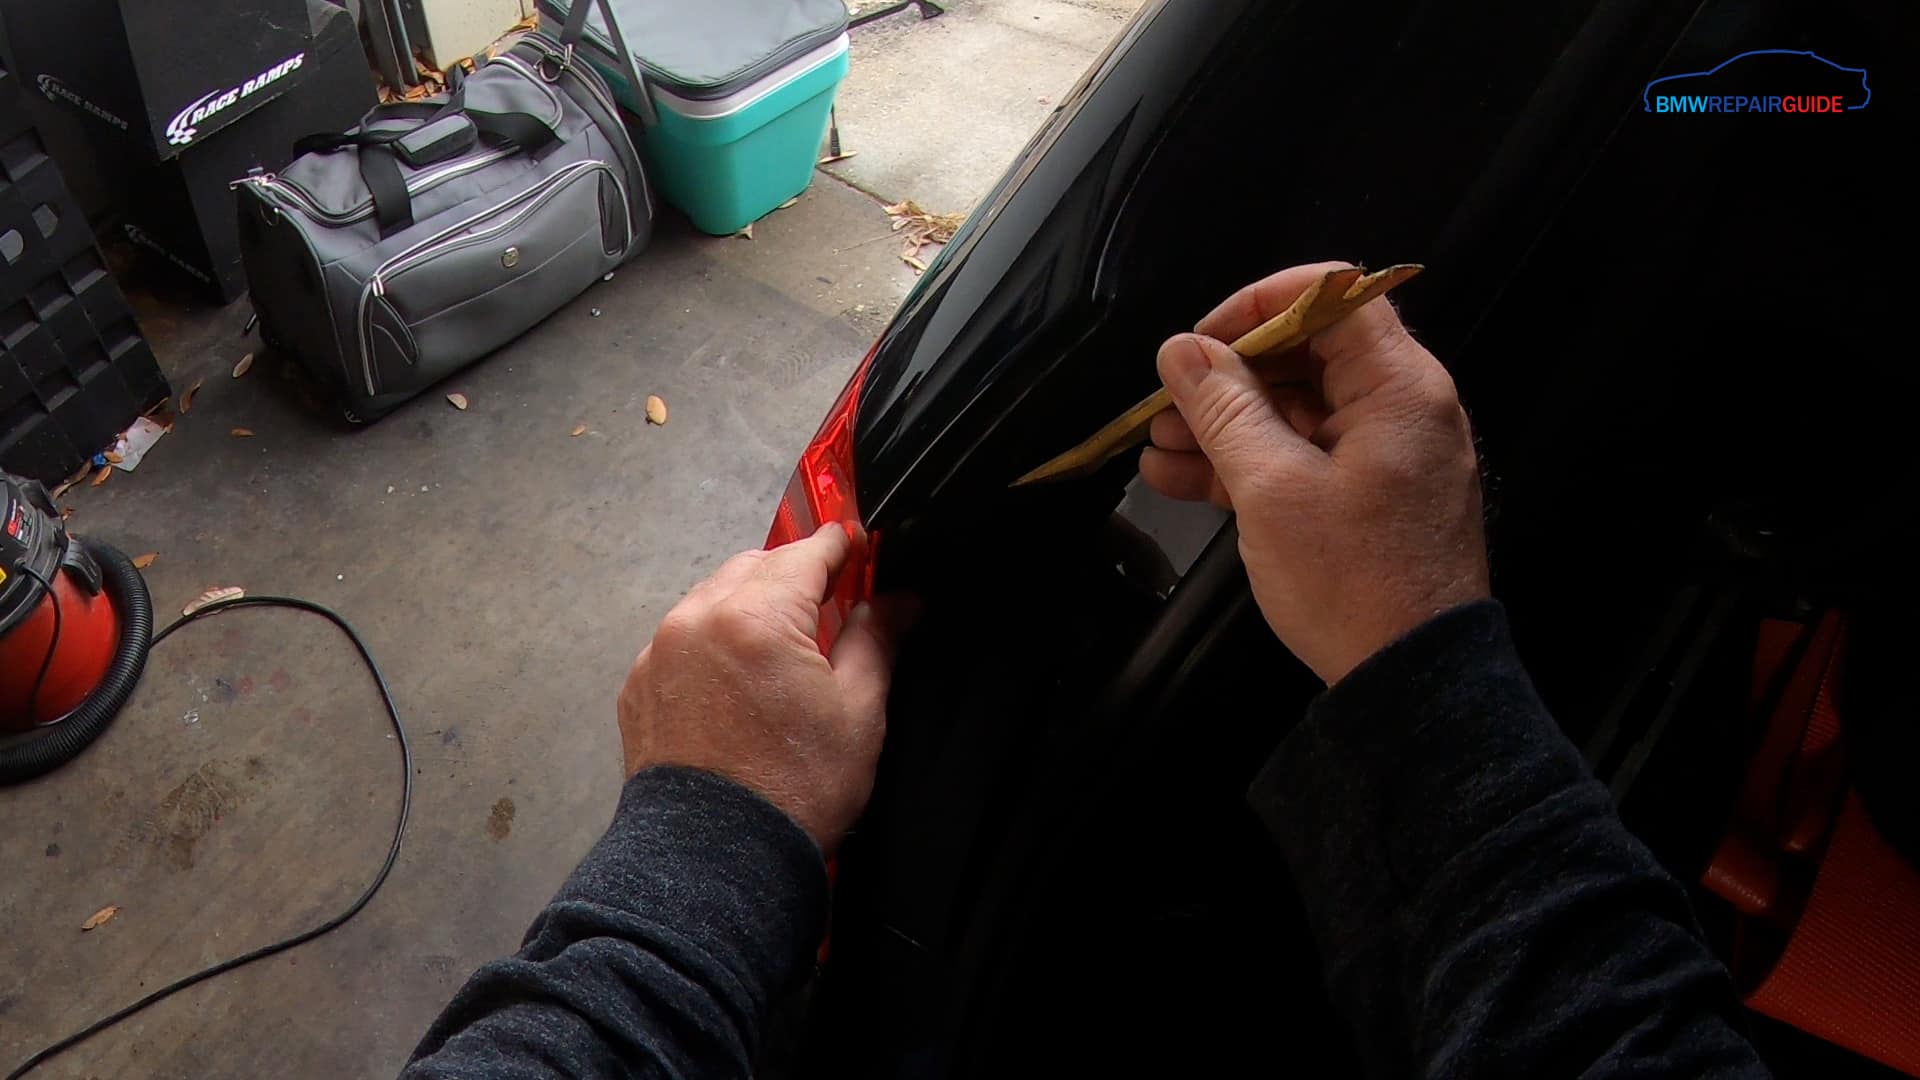 Remove the trim panel from the mounting nuts using a trim removal tool